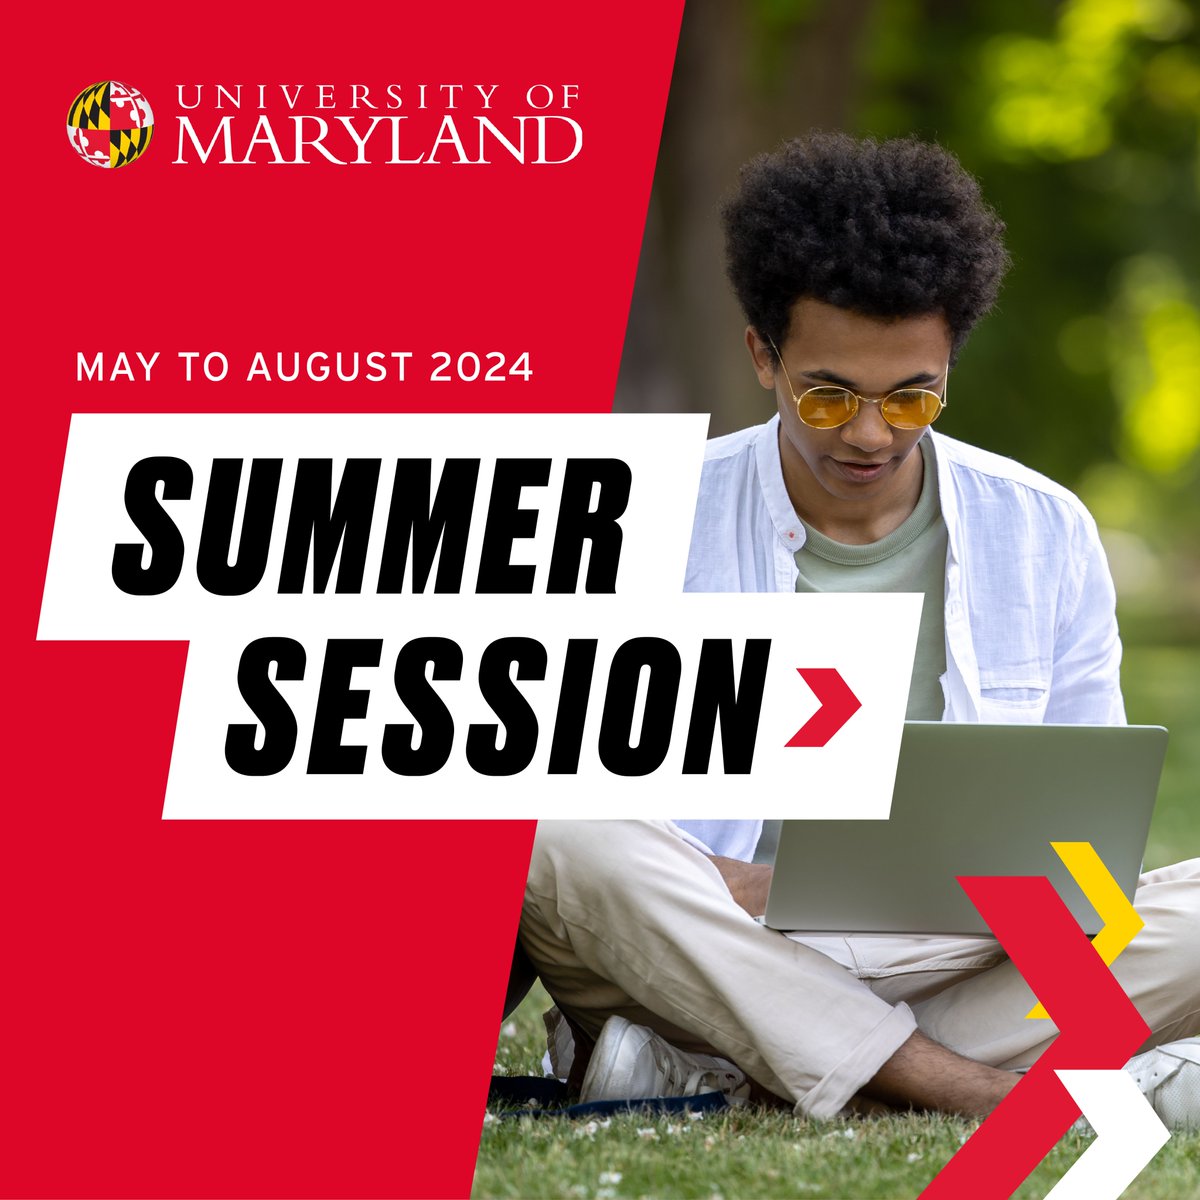 Satisfy a requirement. Stay on track for
graduation. Courses fill quickly! Register for Summer
Session today: summer.umd.edu. #KeepLearningUMD